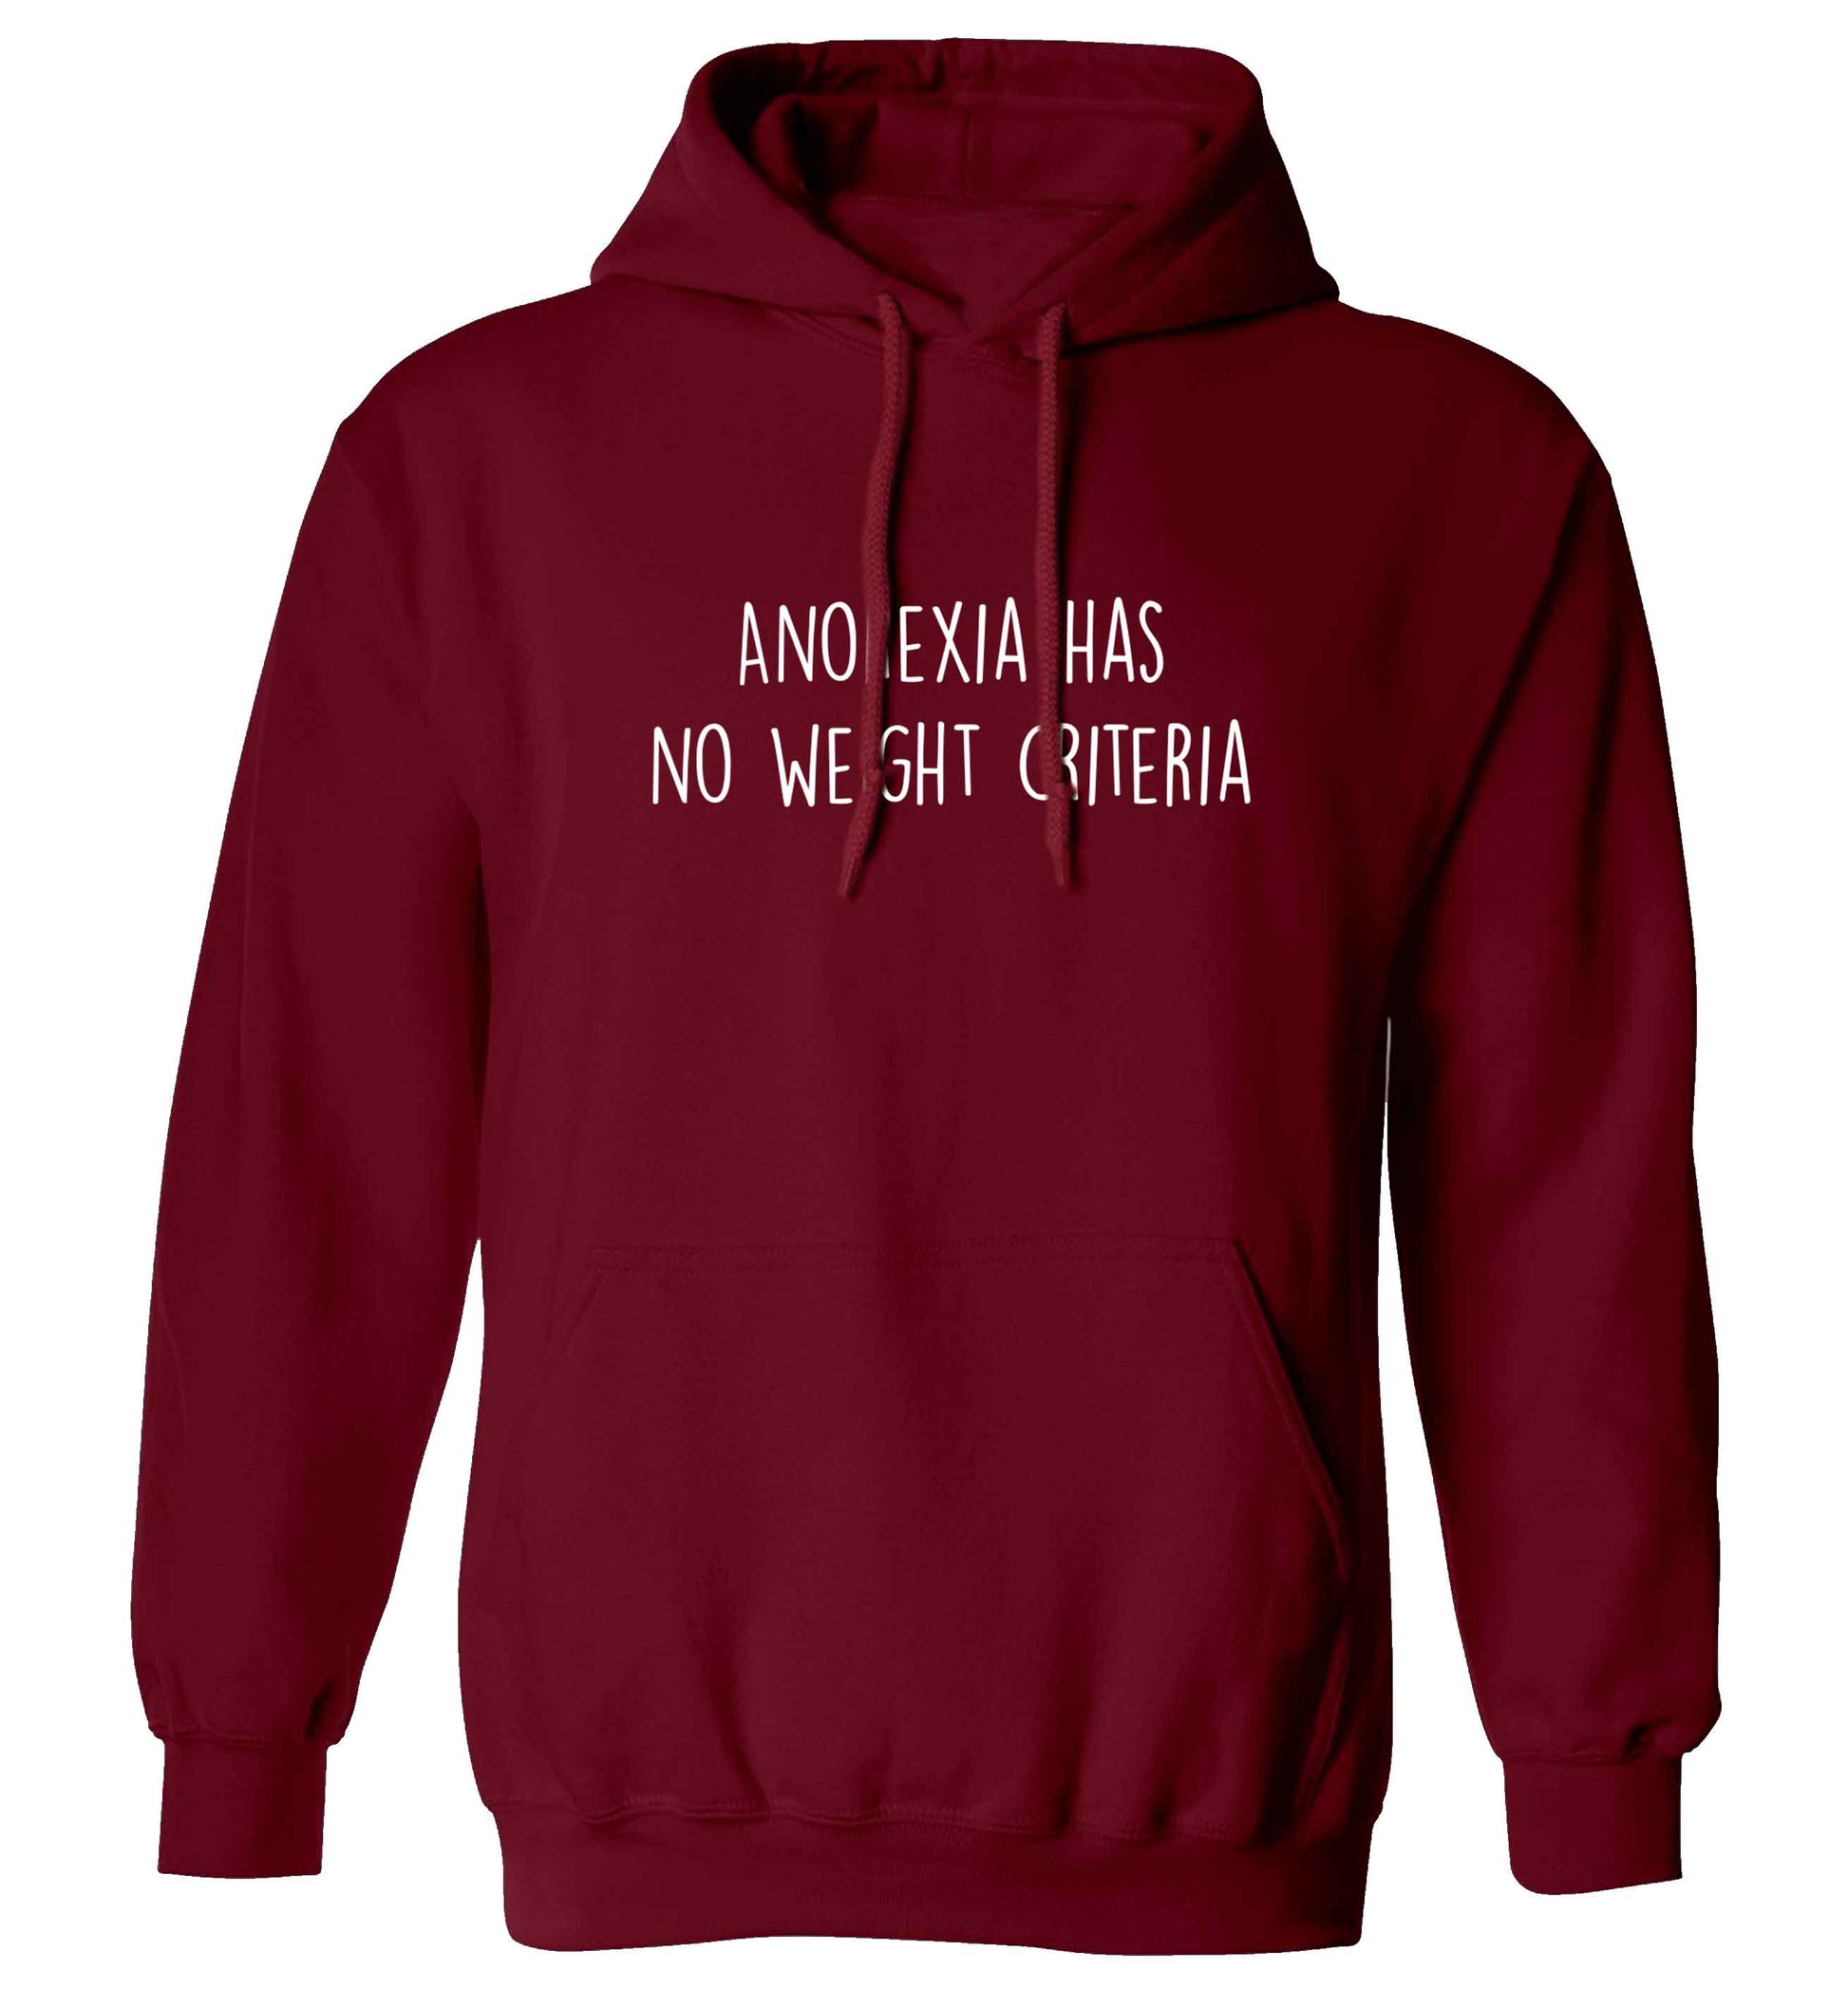 Anorexia has no weight criteria adults unisex maroon hoodie 2XL